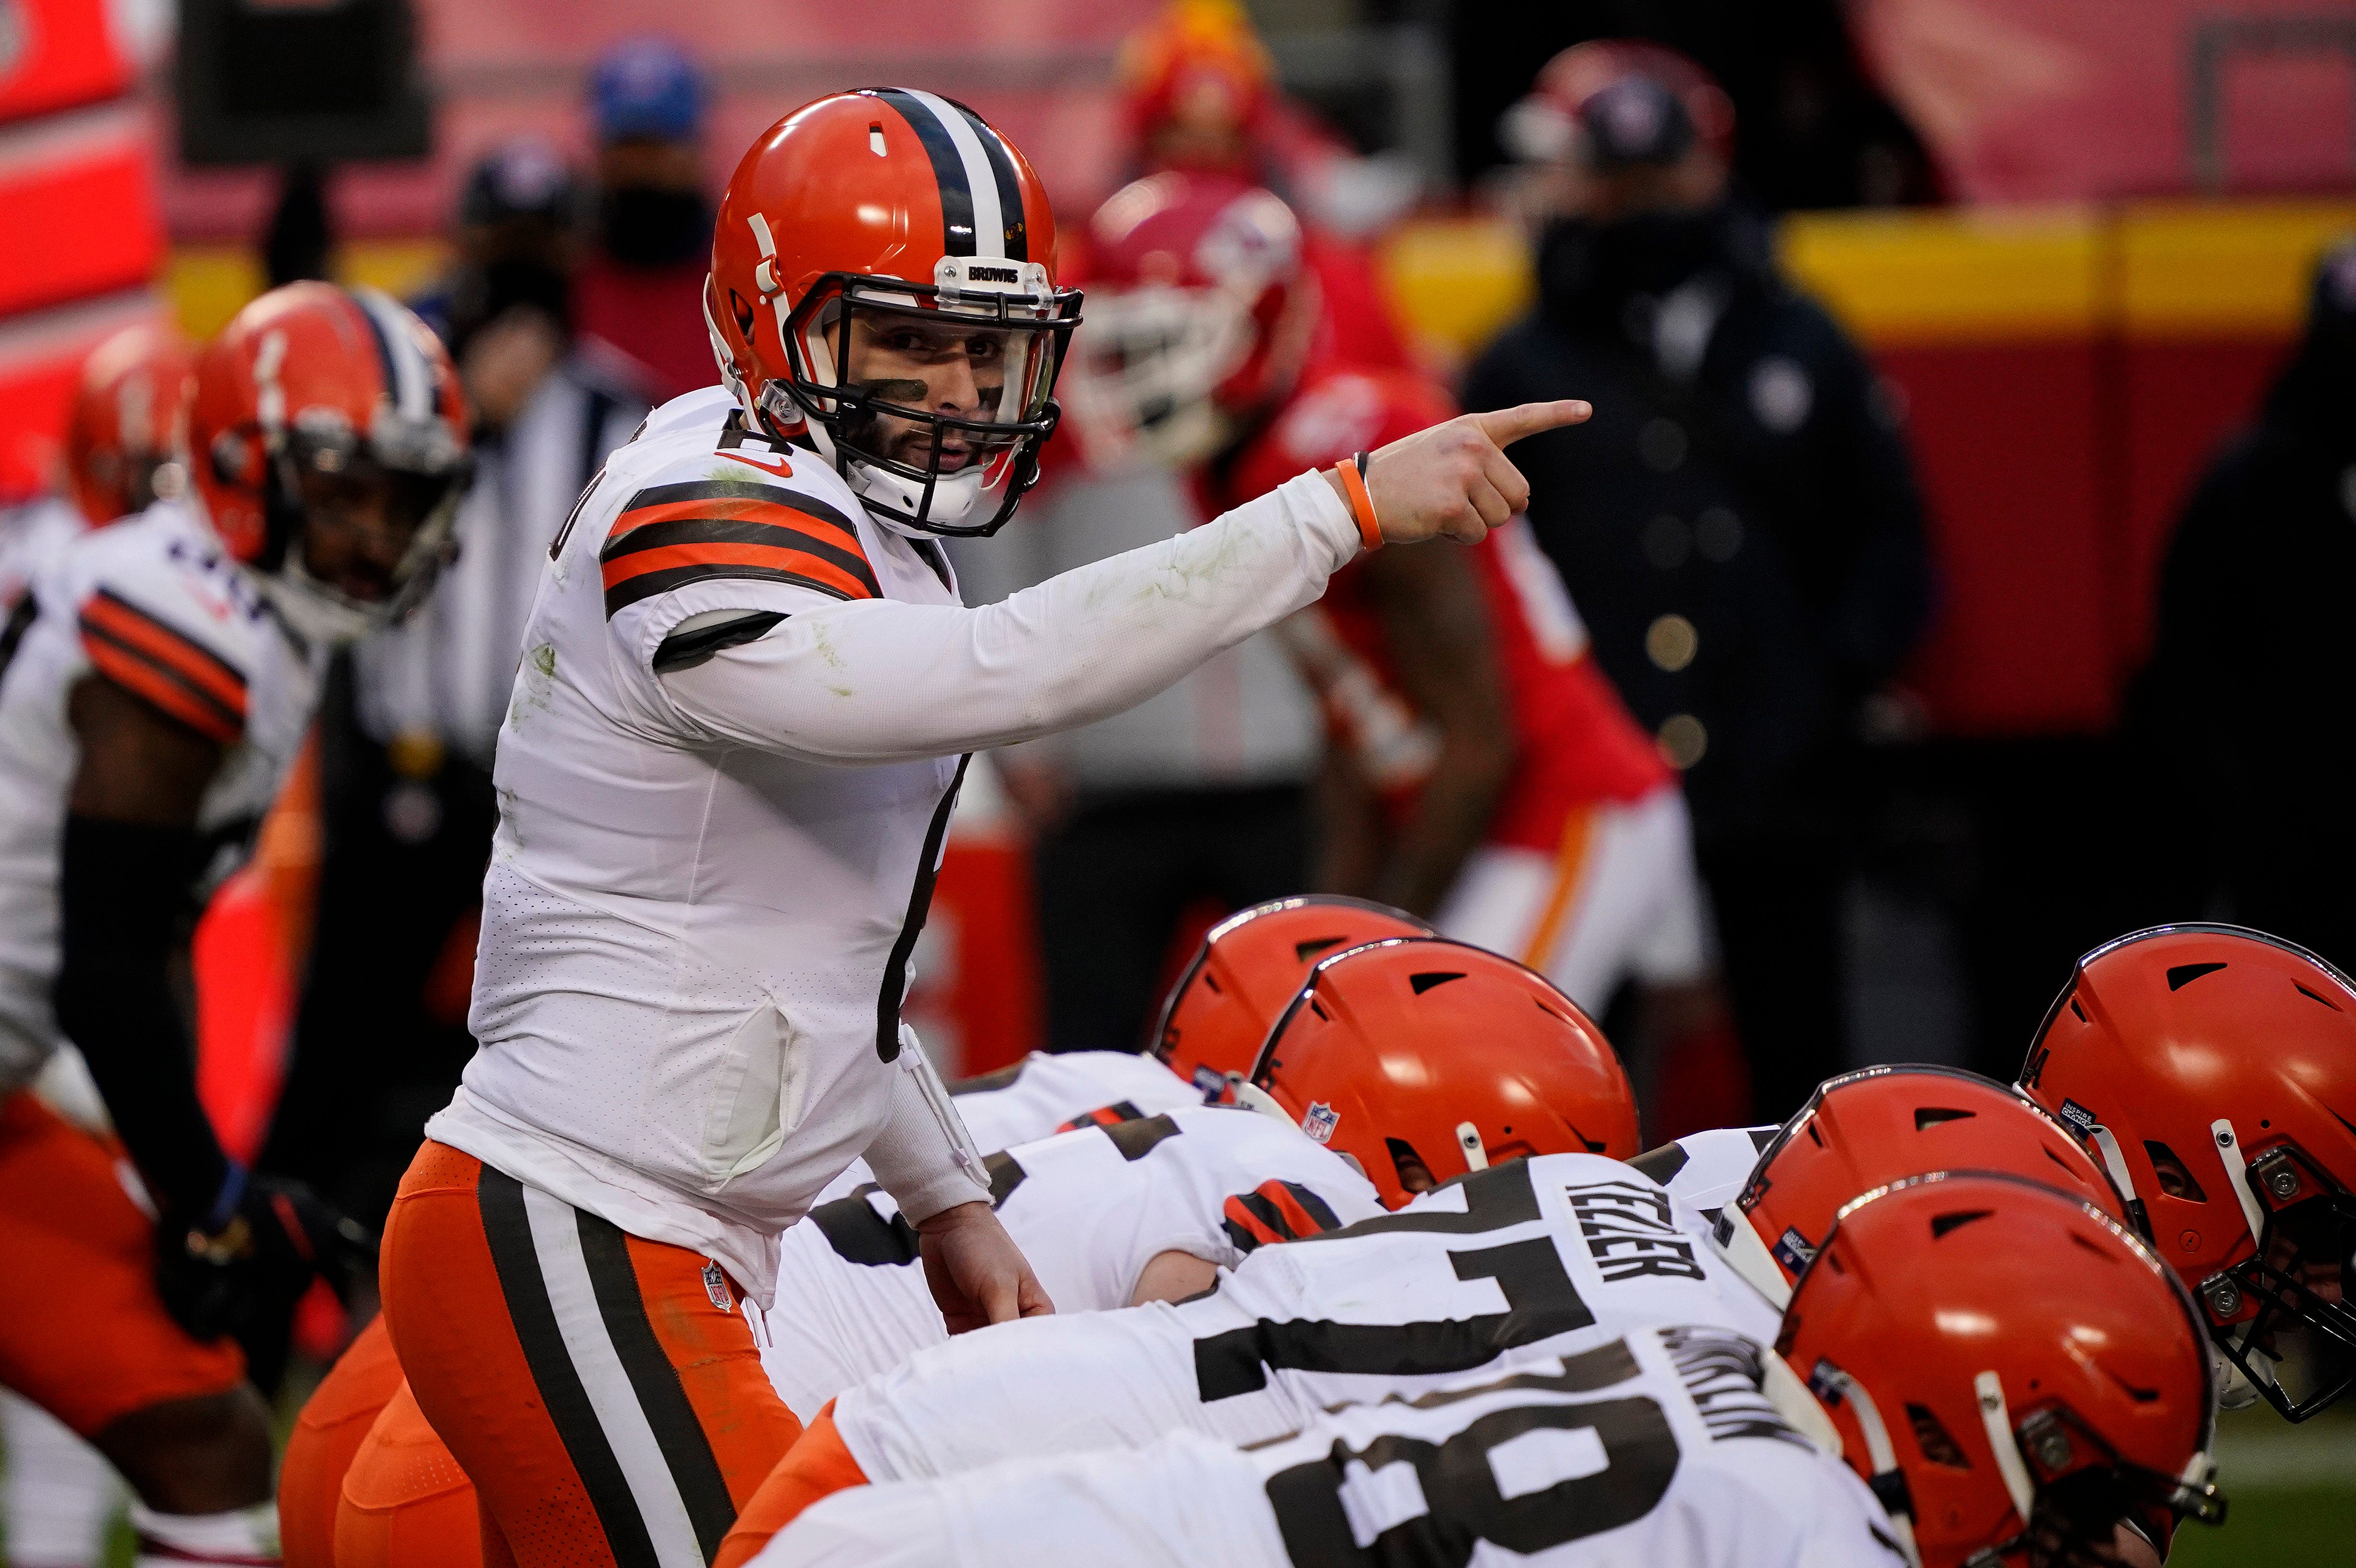 63c78671-6566-497c-9cde-bbb7d2d50461-USP_NFL__AFC_Divisional_Round-Cleveland_Browns_at Cleveland Browns trade QB Baker Mayfield to Carolina Panthers